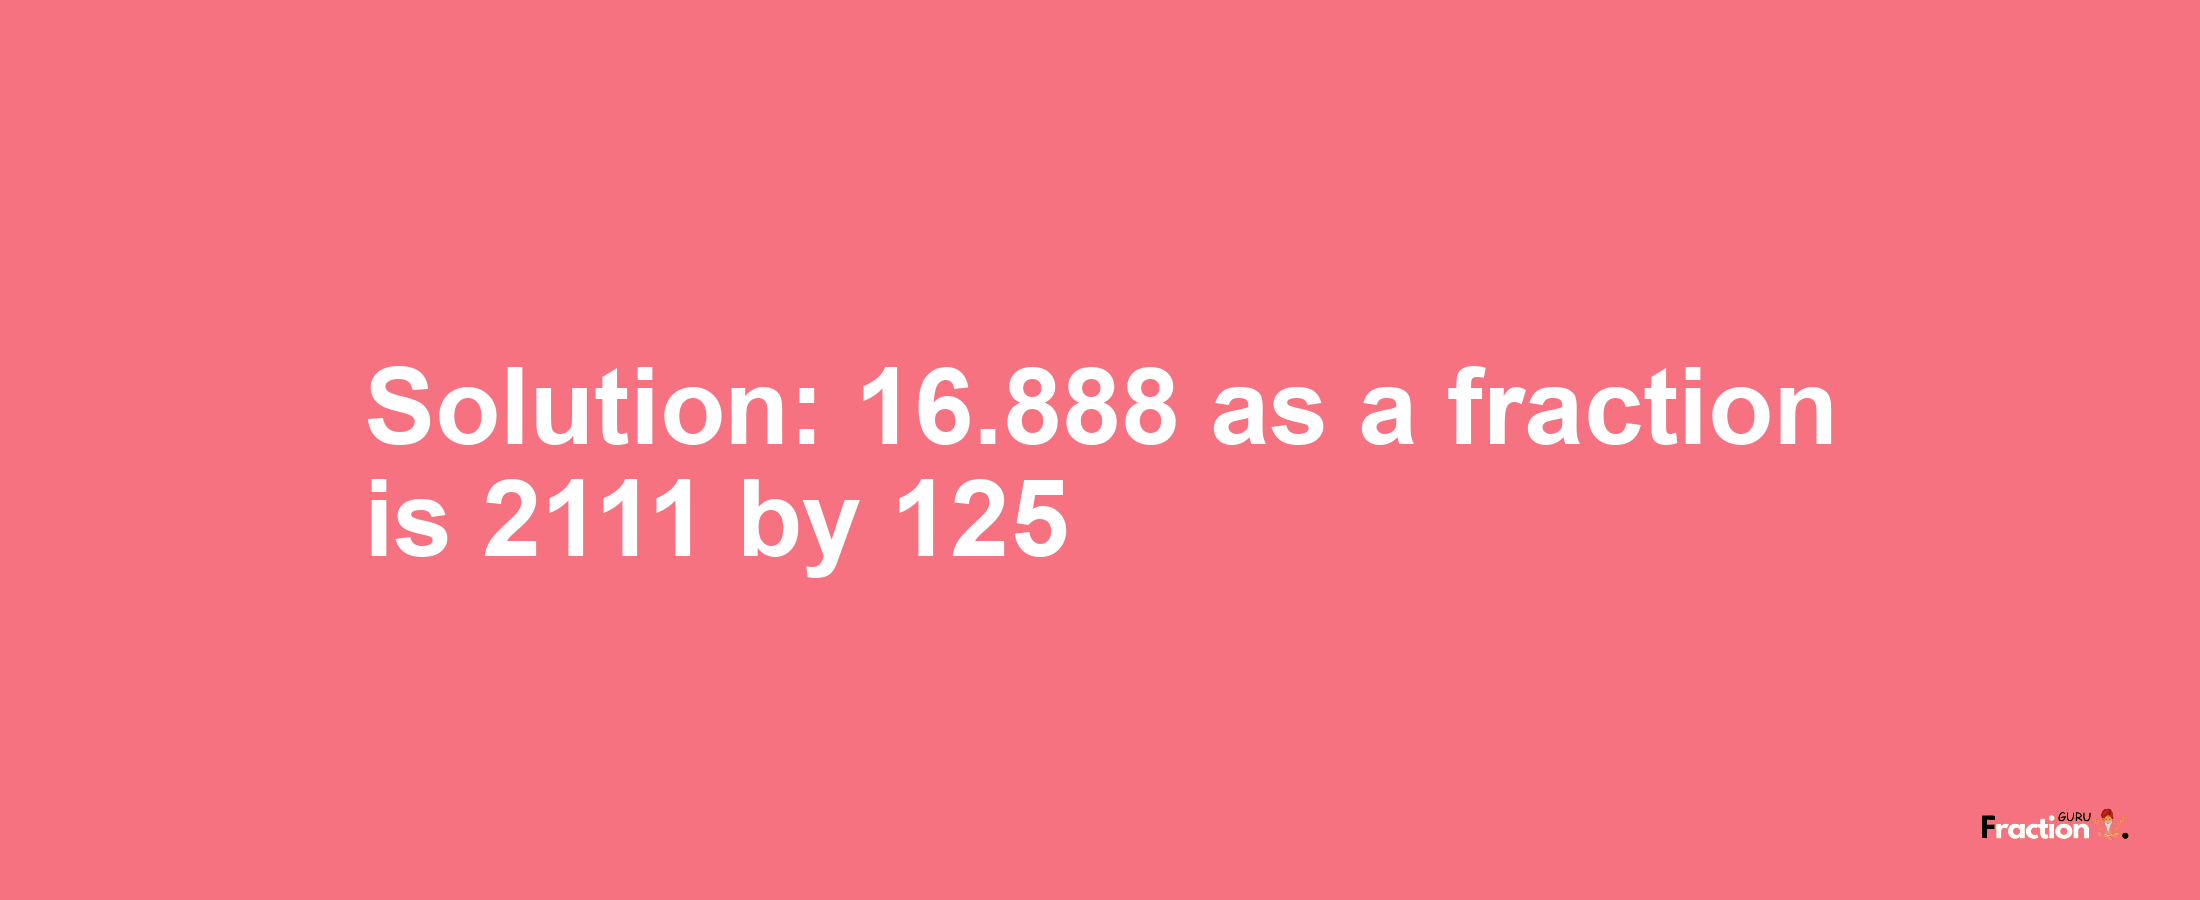 Solution:16.888 as a fraction is 2111/125